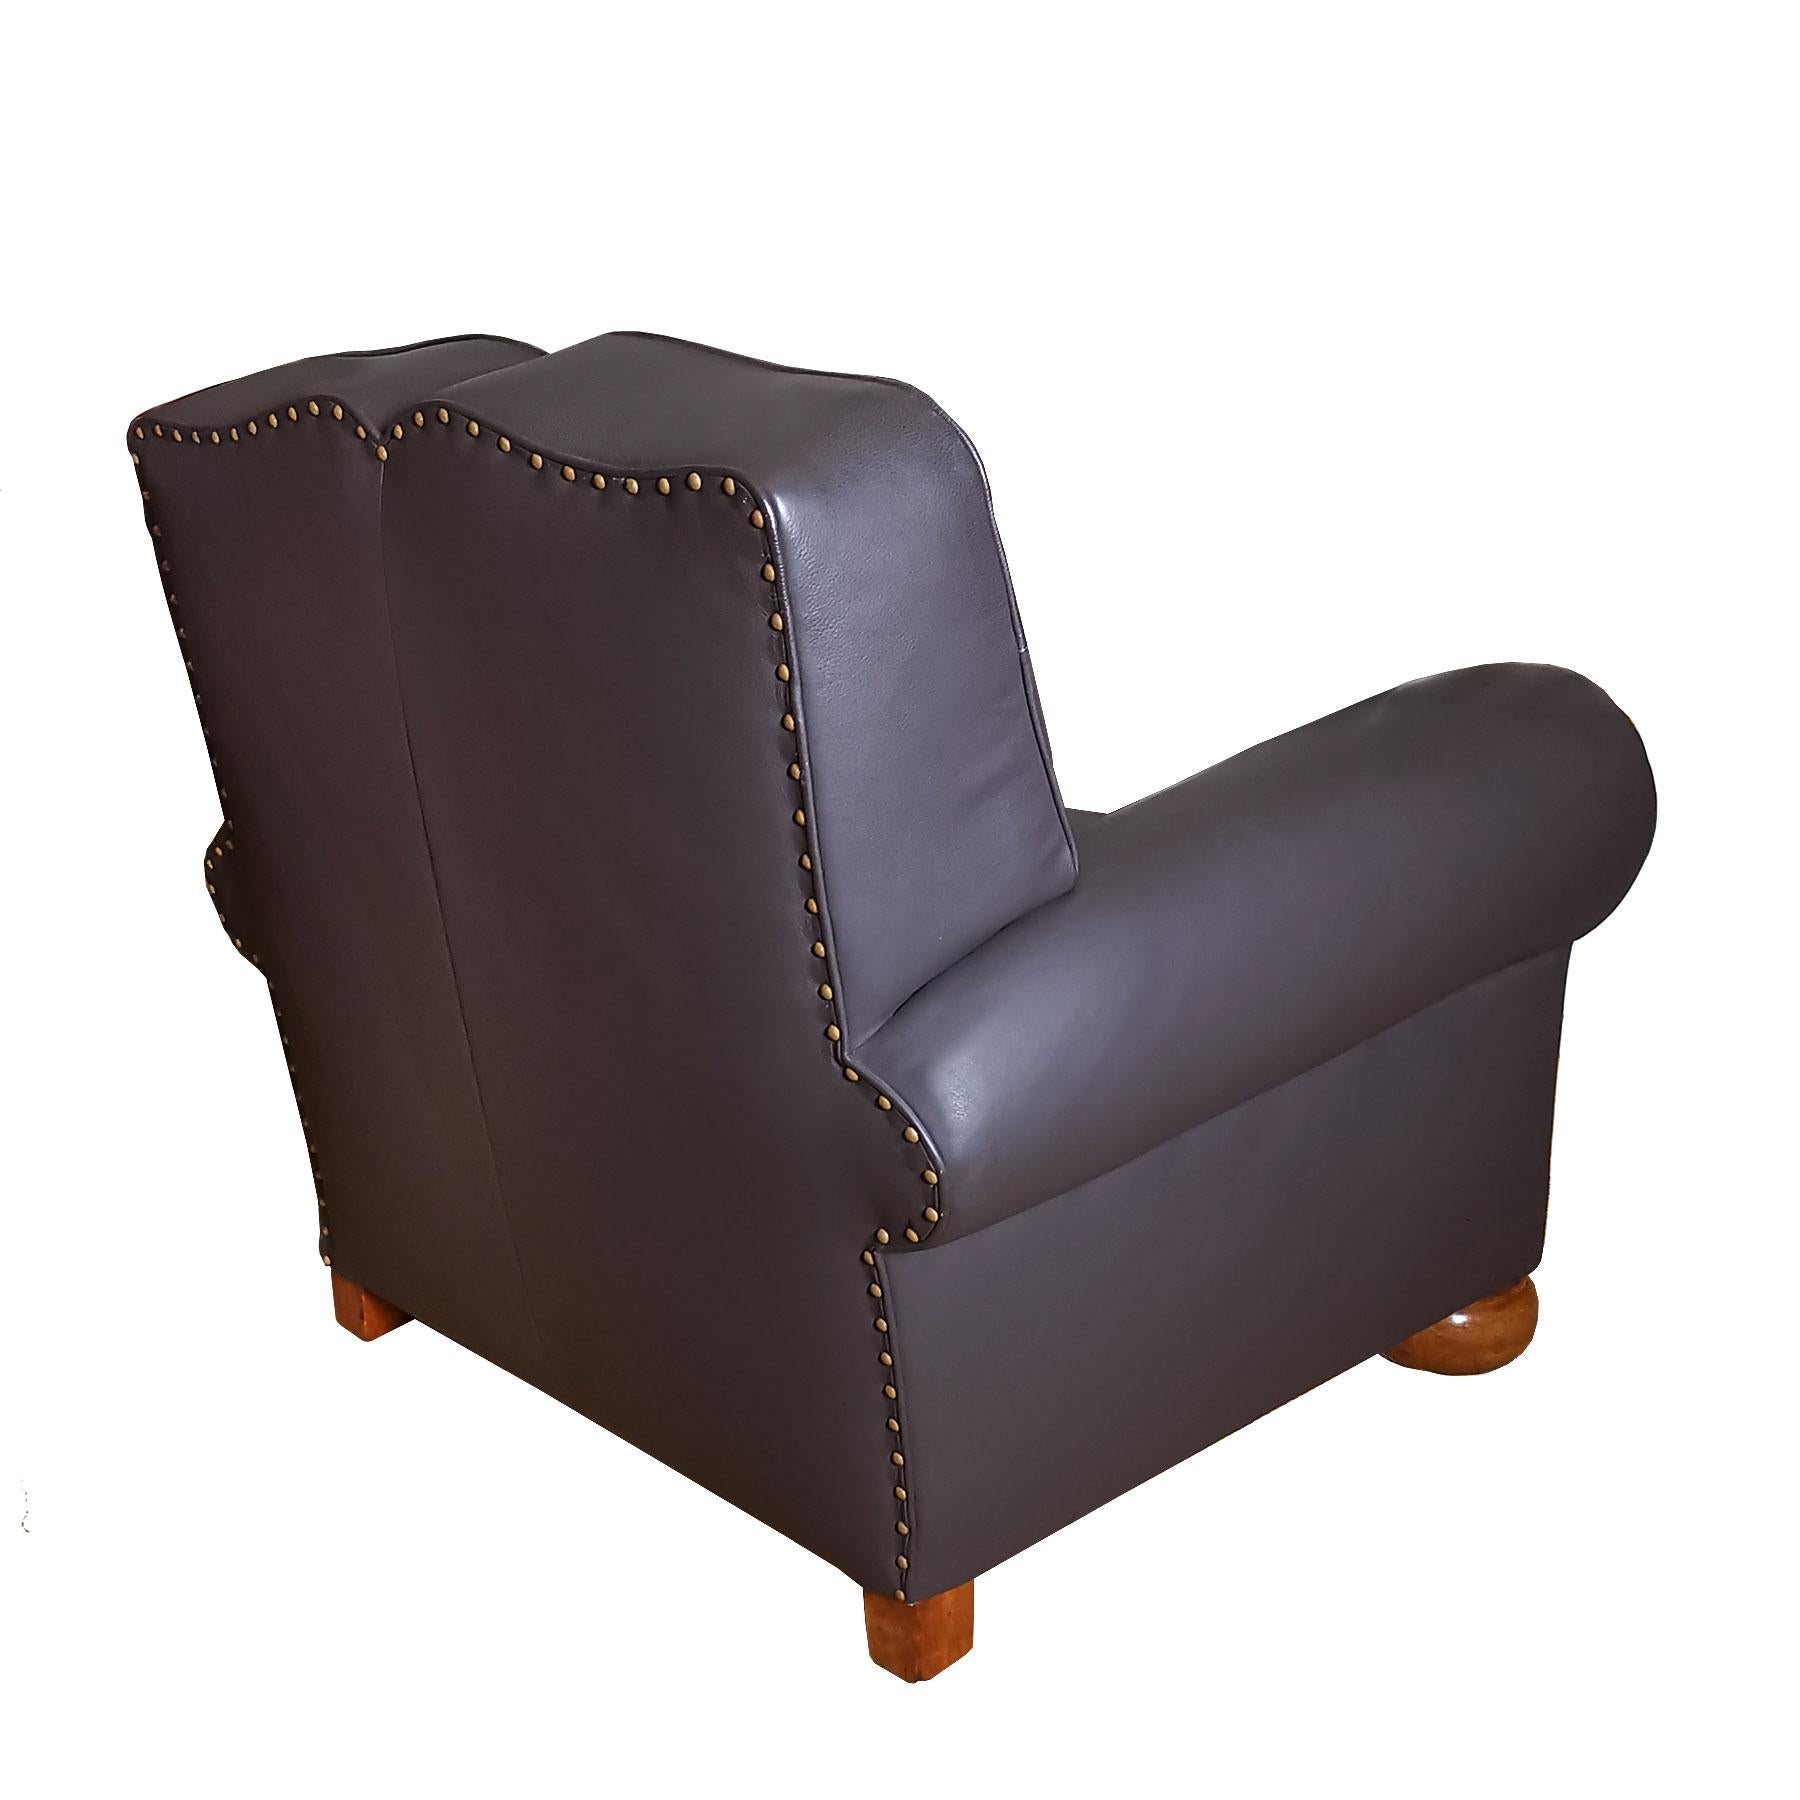 Mid-20th Century Big Mid-Century Modern Club Armchair, Wood and Chocolate Leather - Belgium For Sale